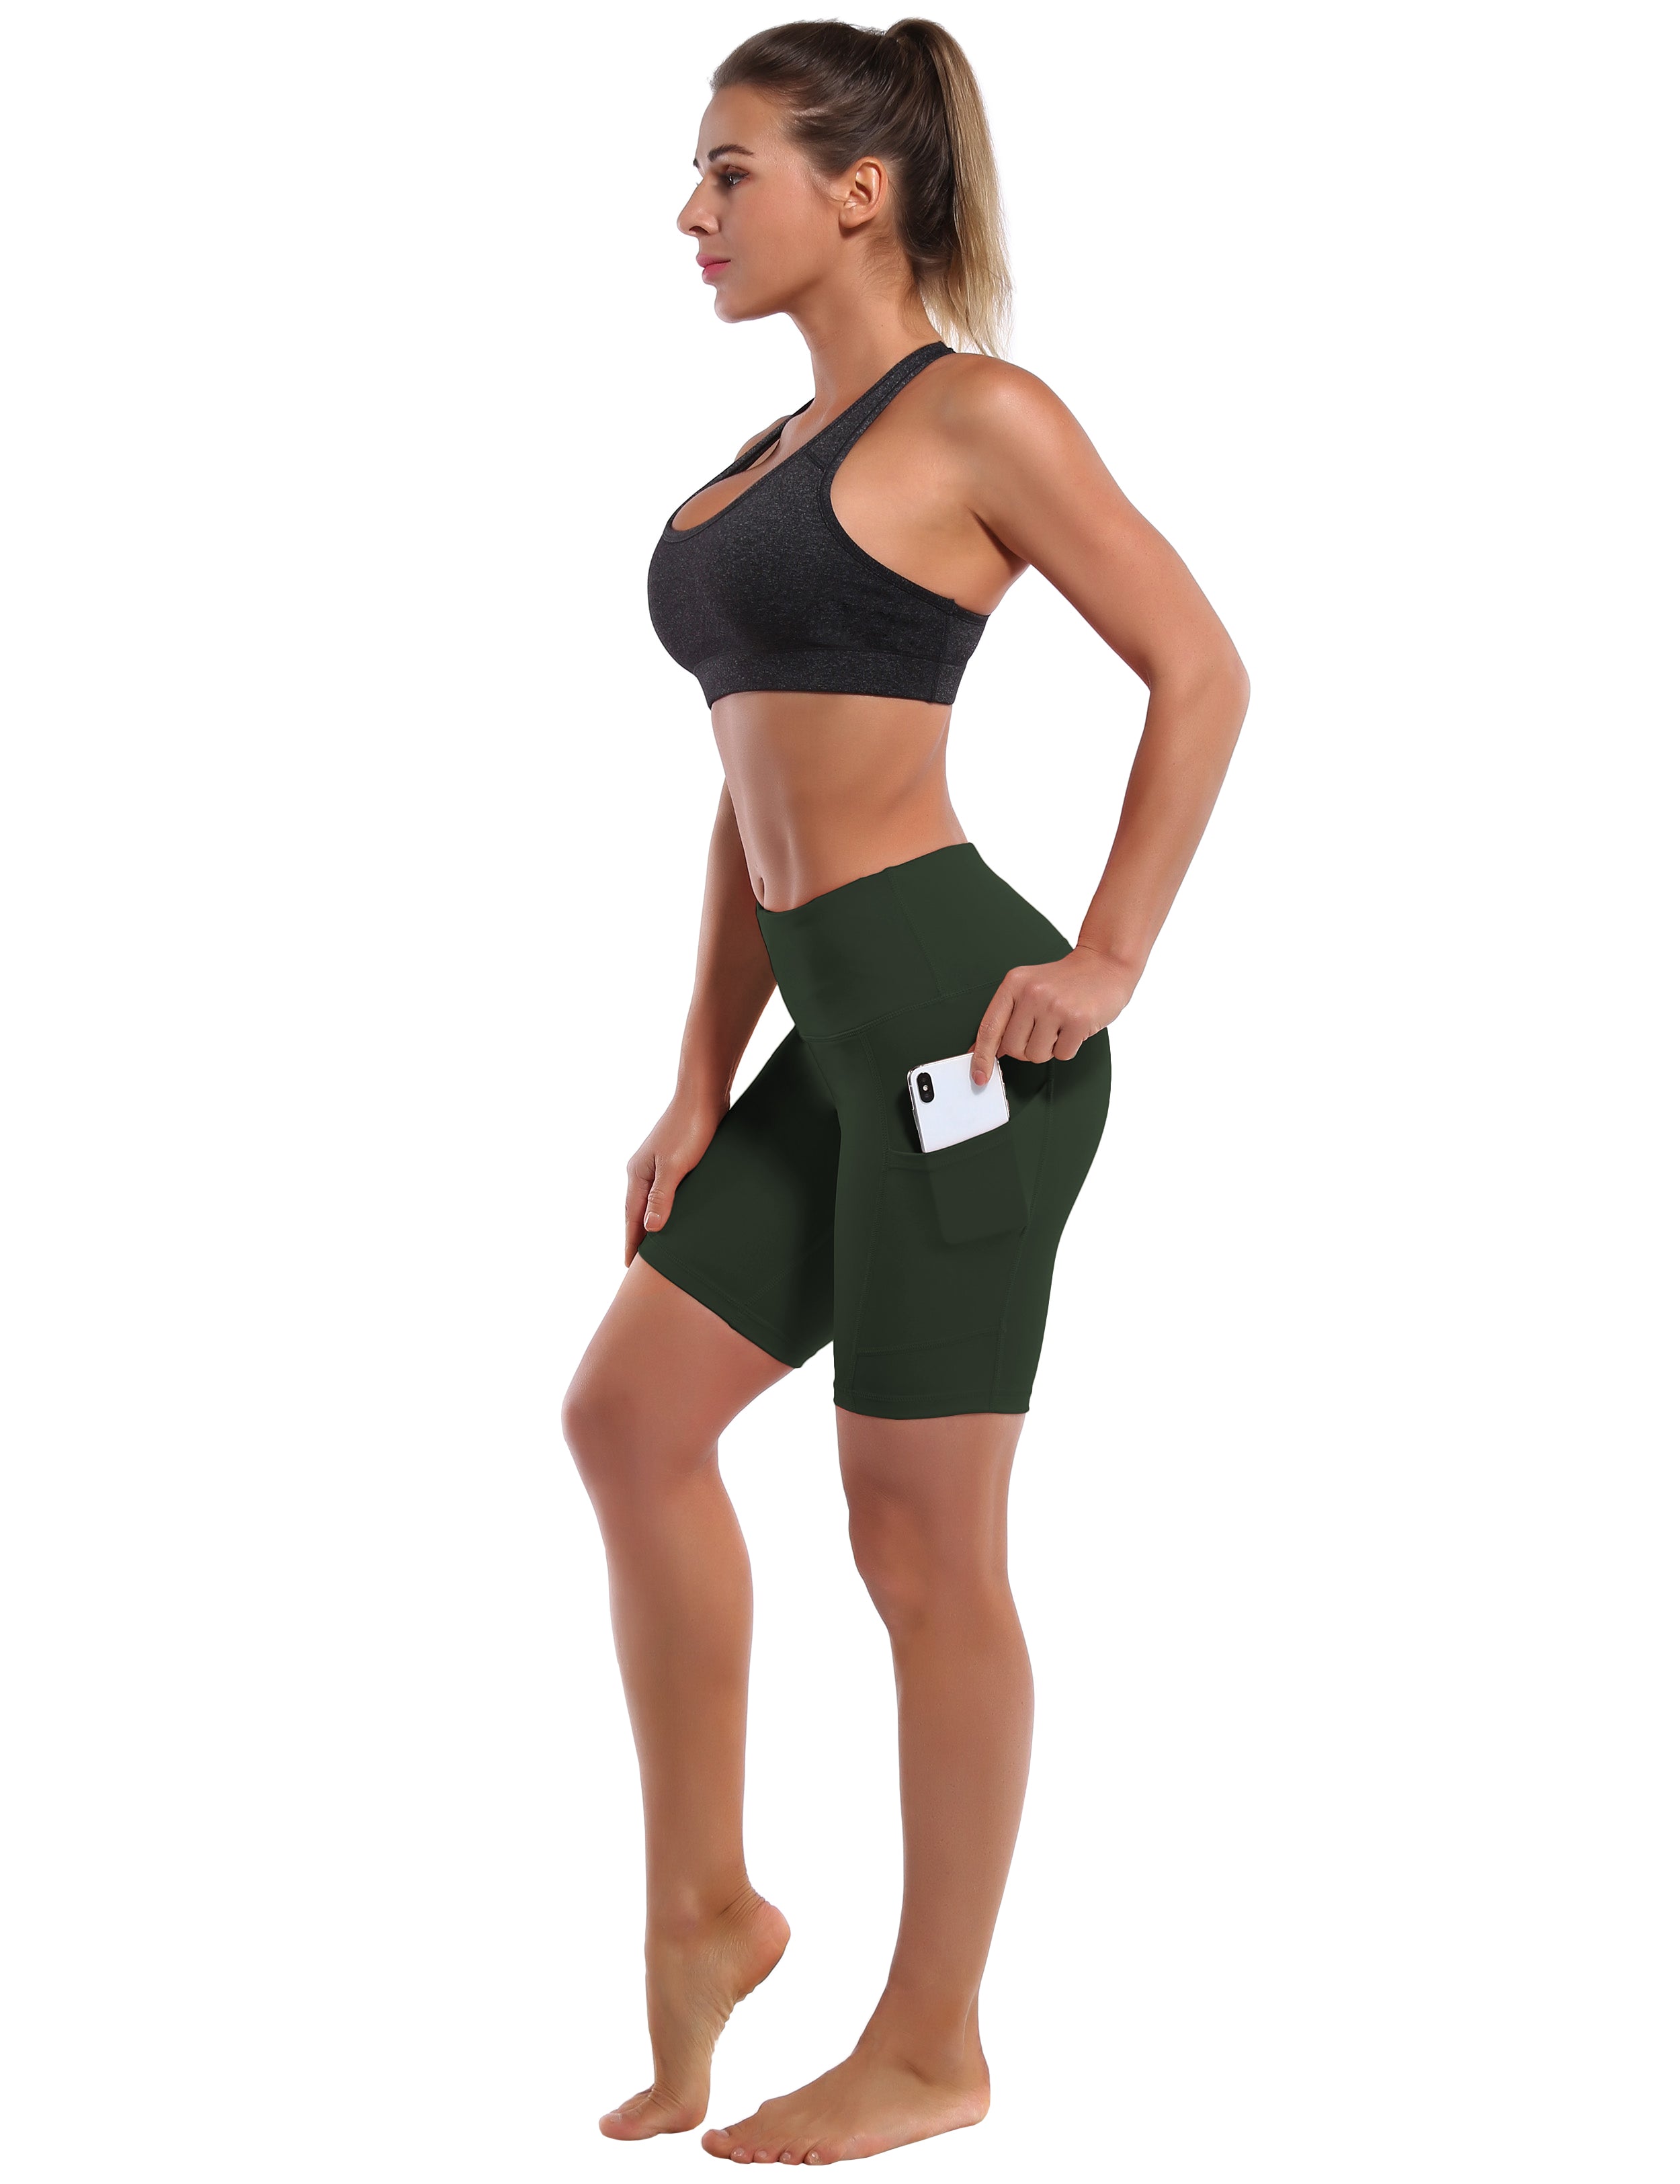 8" Side Pockets Yoga Shorts olivegray Sleek, soft, smooth and totally comfortable: our newest style is here. Softest-ever fabric High elasticity High density 4-way stretch Fabric doesn't attract lint easily No see-through Moisture-wicking Machine wash 75% Nylon, 25% Spandex